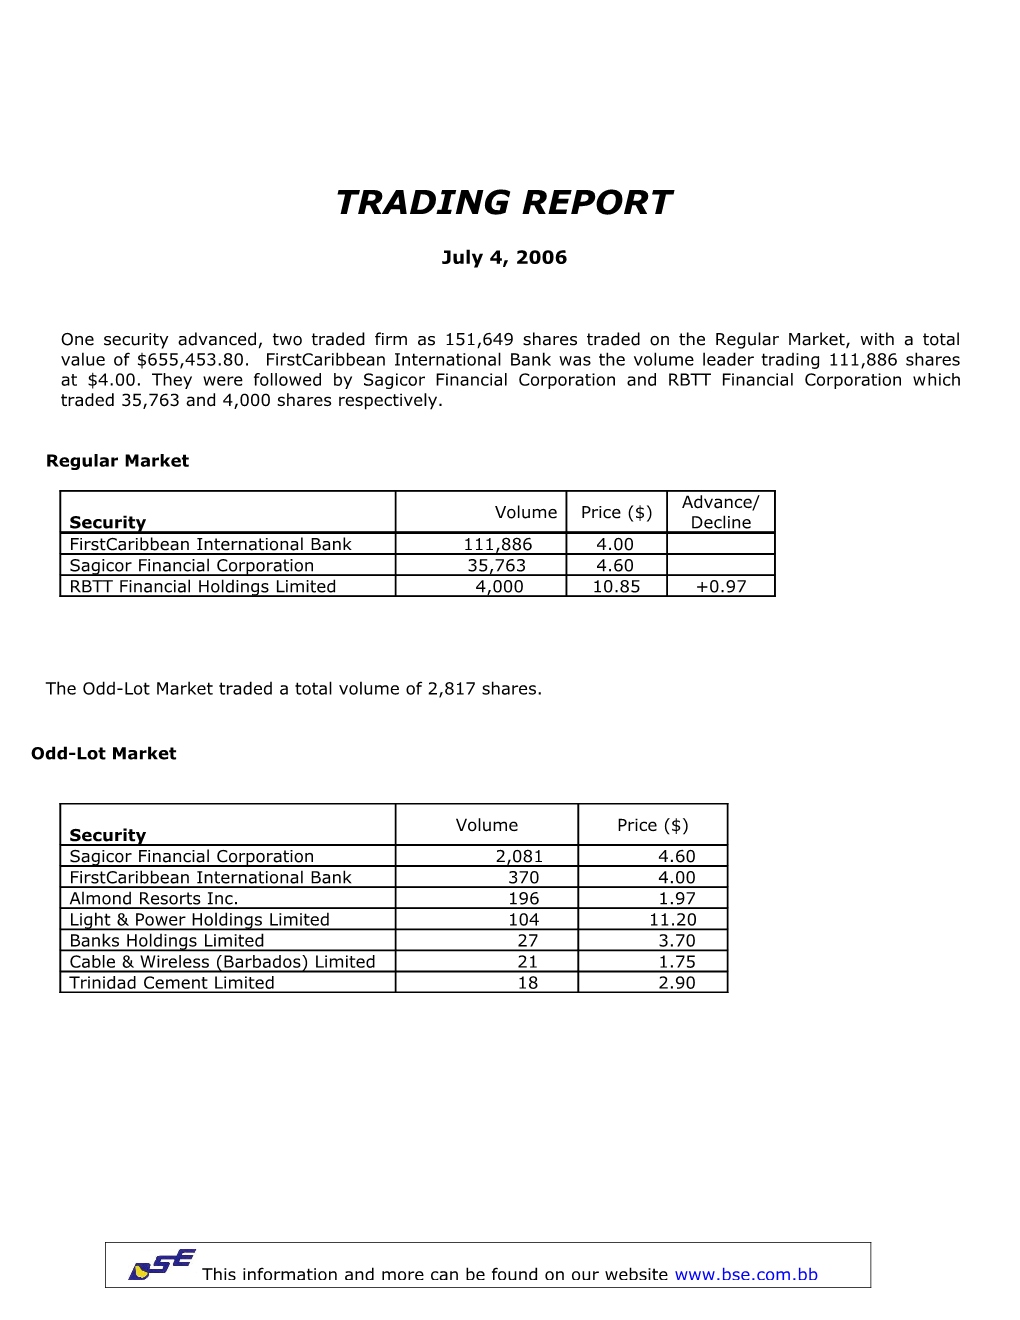 The Odd-Lot Market Traded a Total Volume of 2,817 Shares